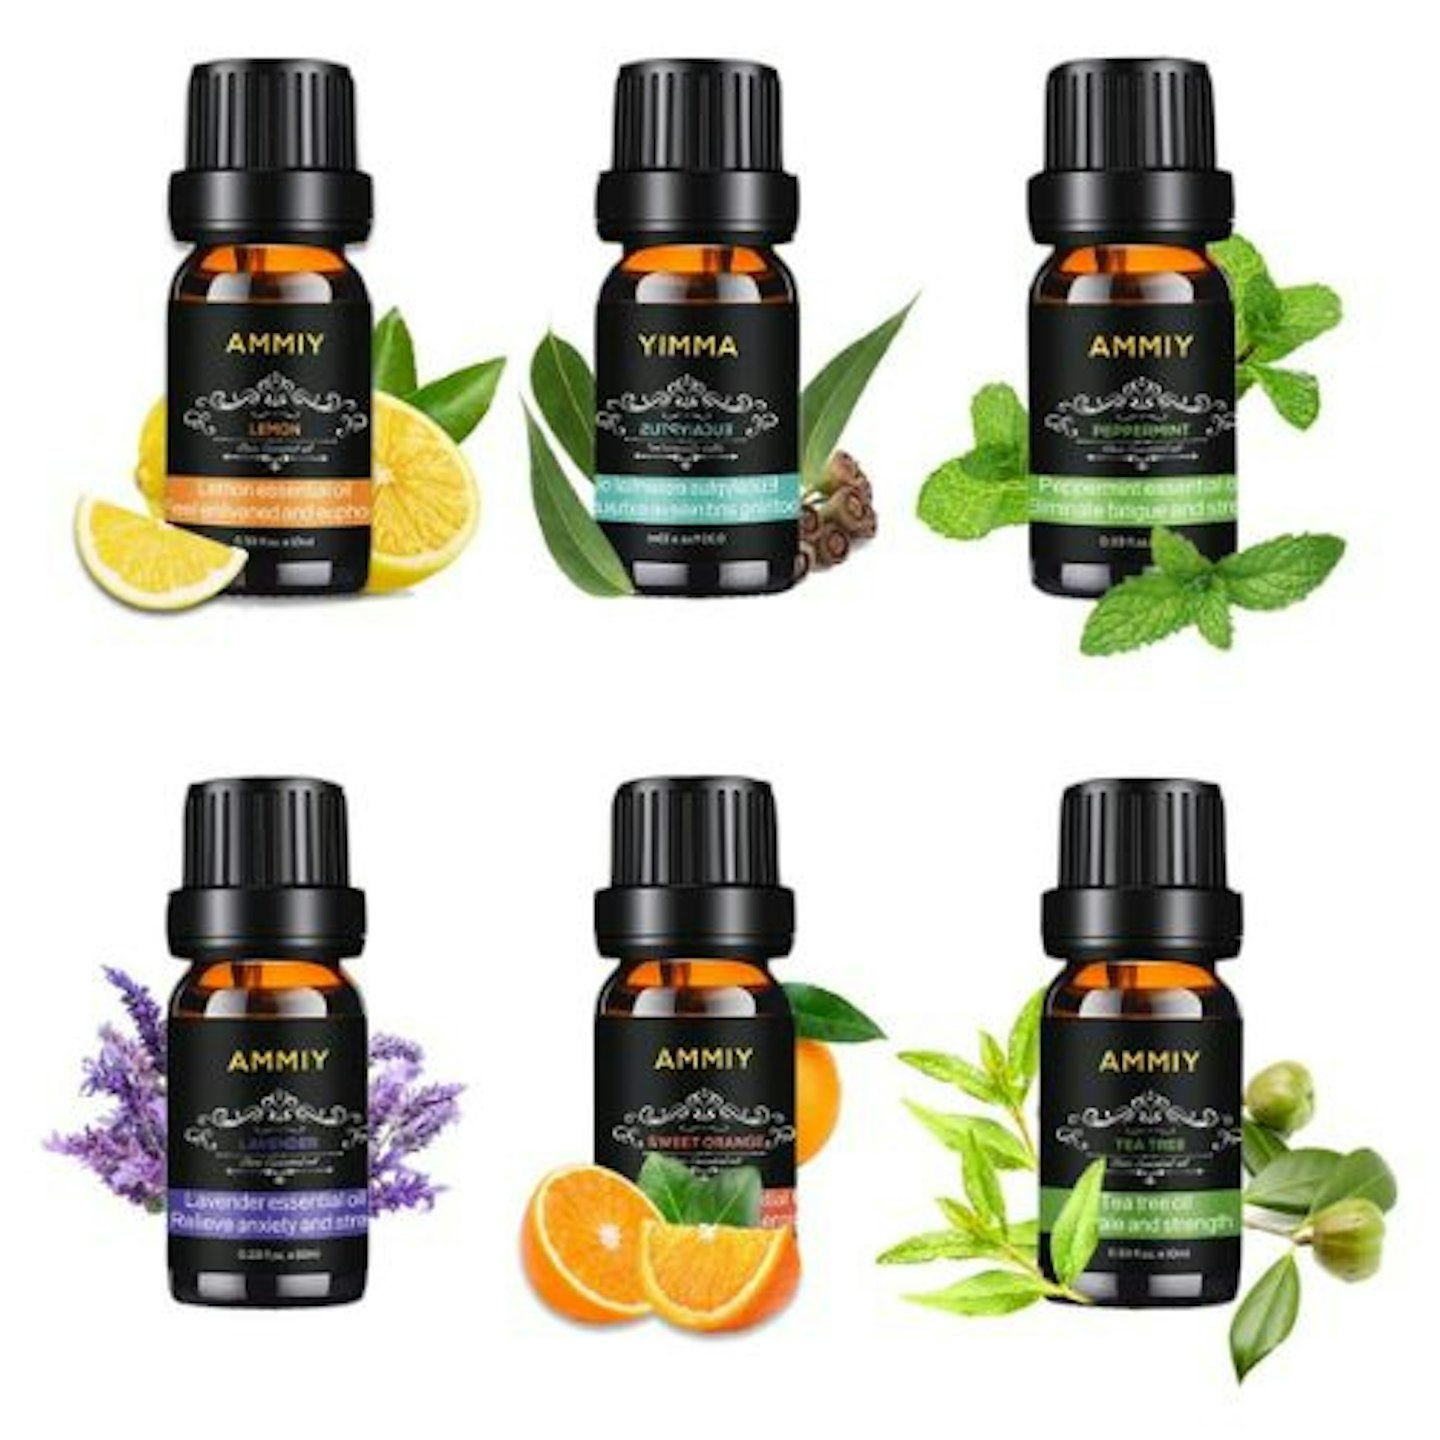 AMMIY Essential Oils Set of 6 x 10ml for Aromatherapy Bath Spa Diffuser Fragrance Relaxing Scent, Pure, Natural, Vegan Oils Including Eucalyptus, Lemon,...